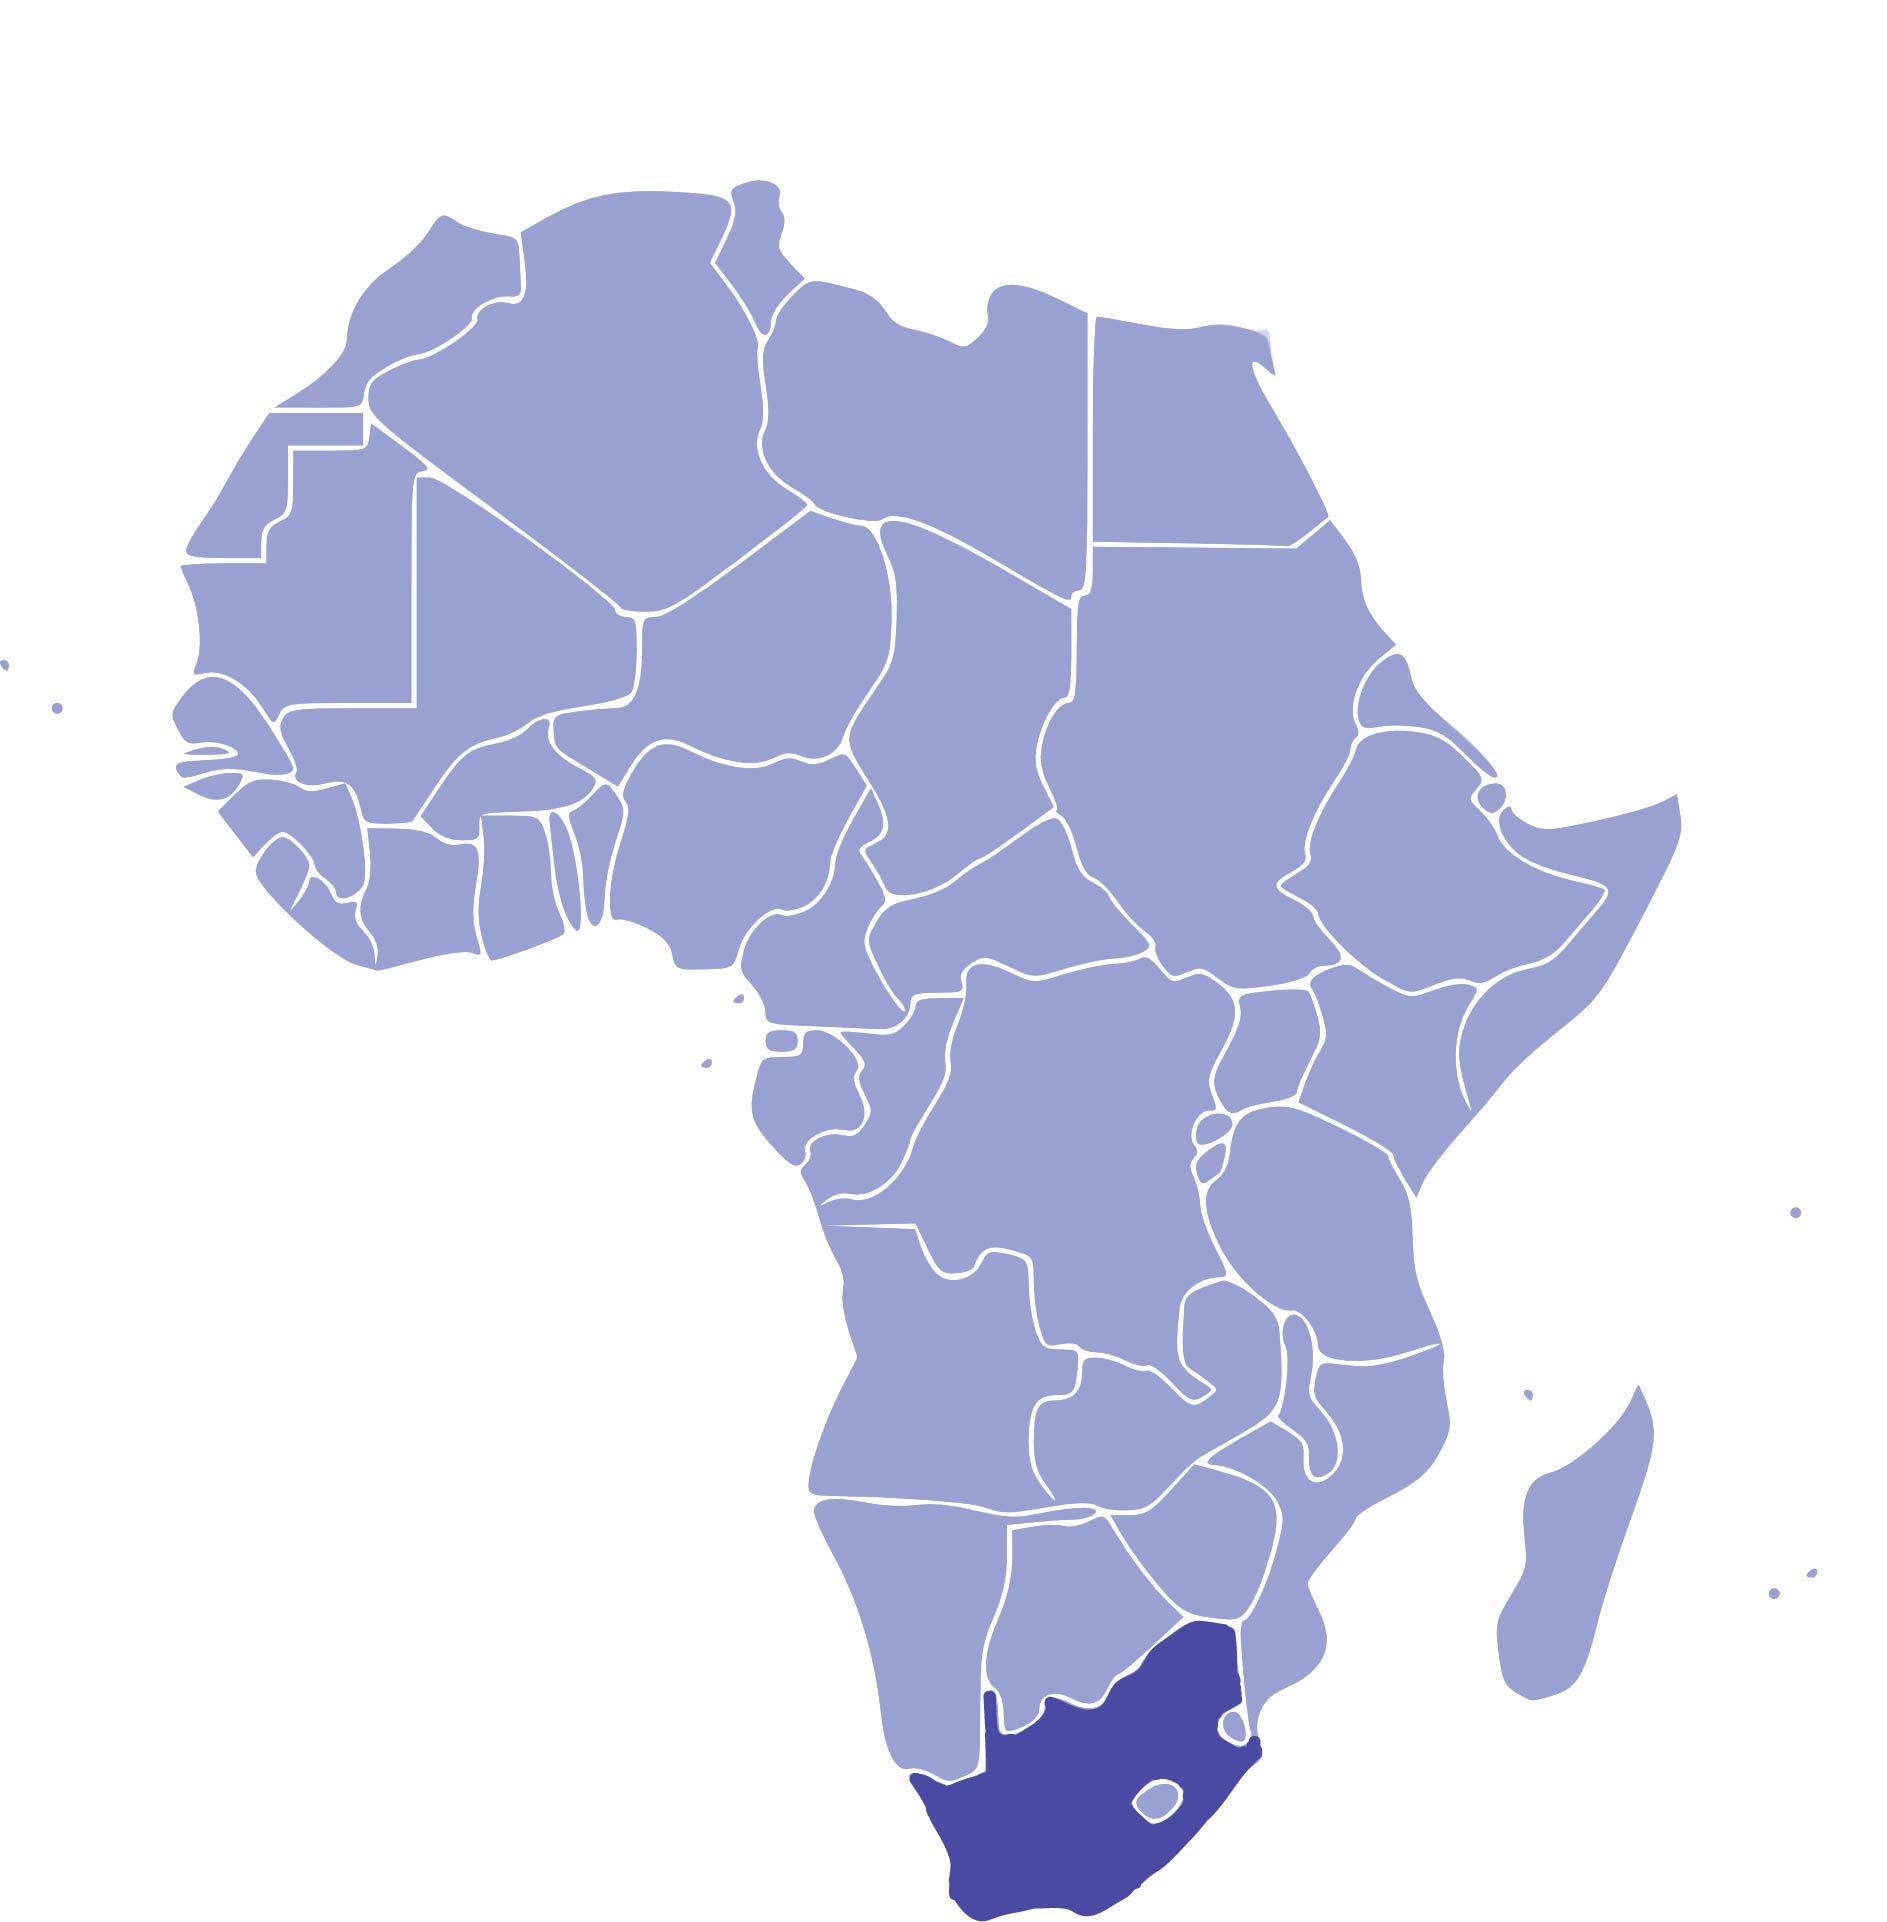 South Africa in the map of Africa.